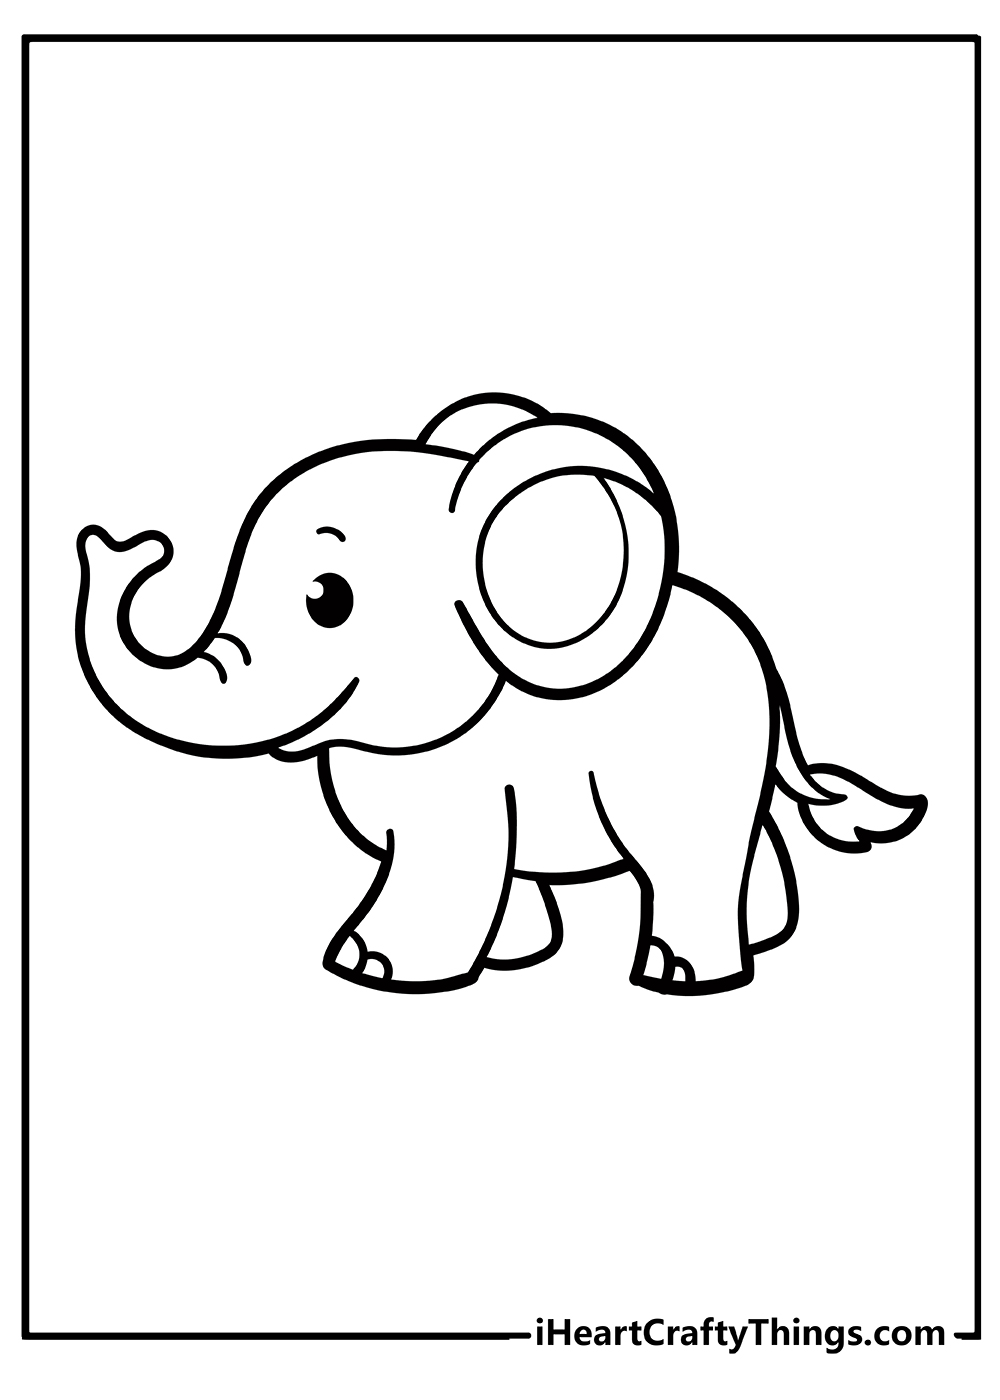 Printable Elephant Coloring Pages Updated 20